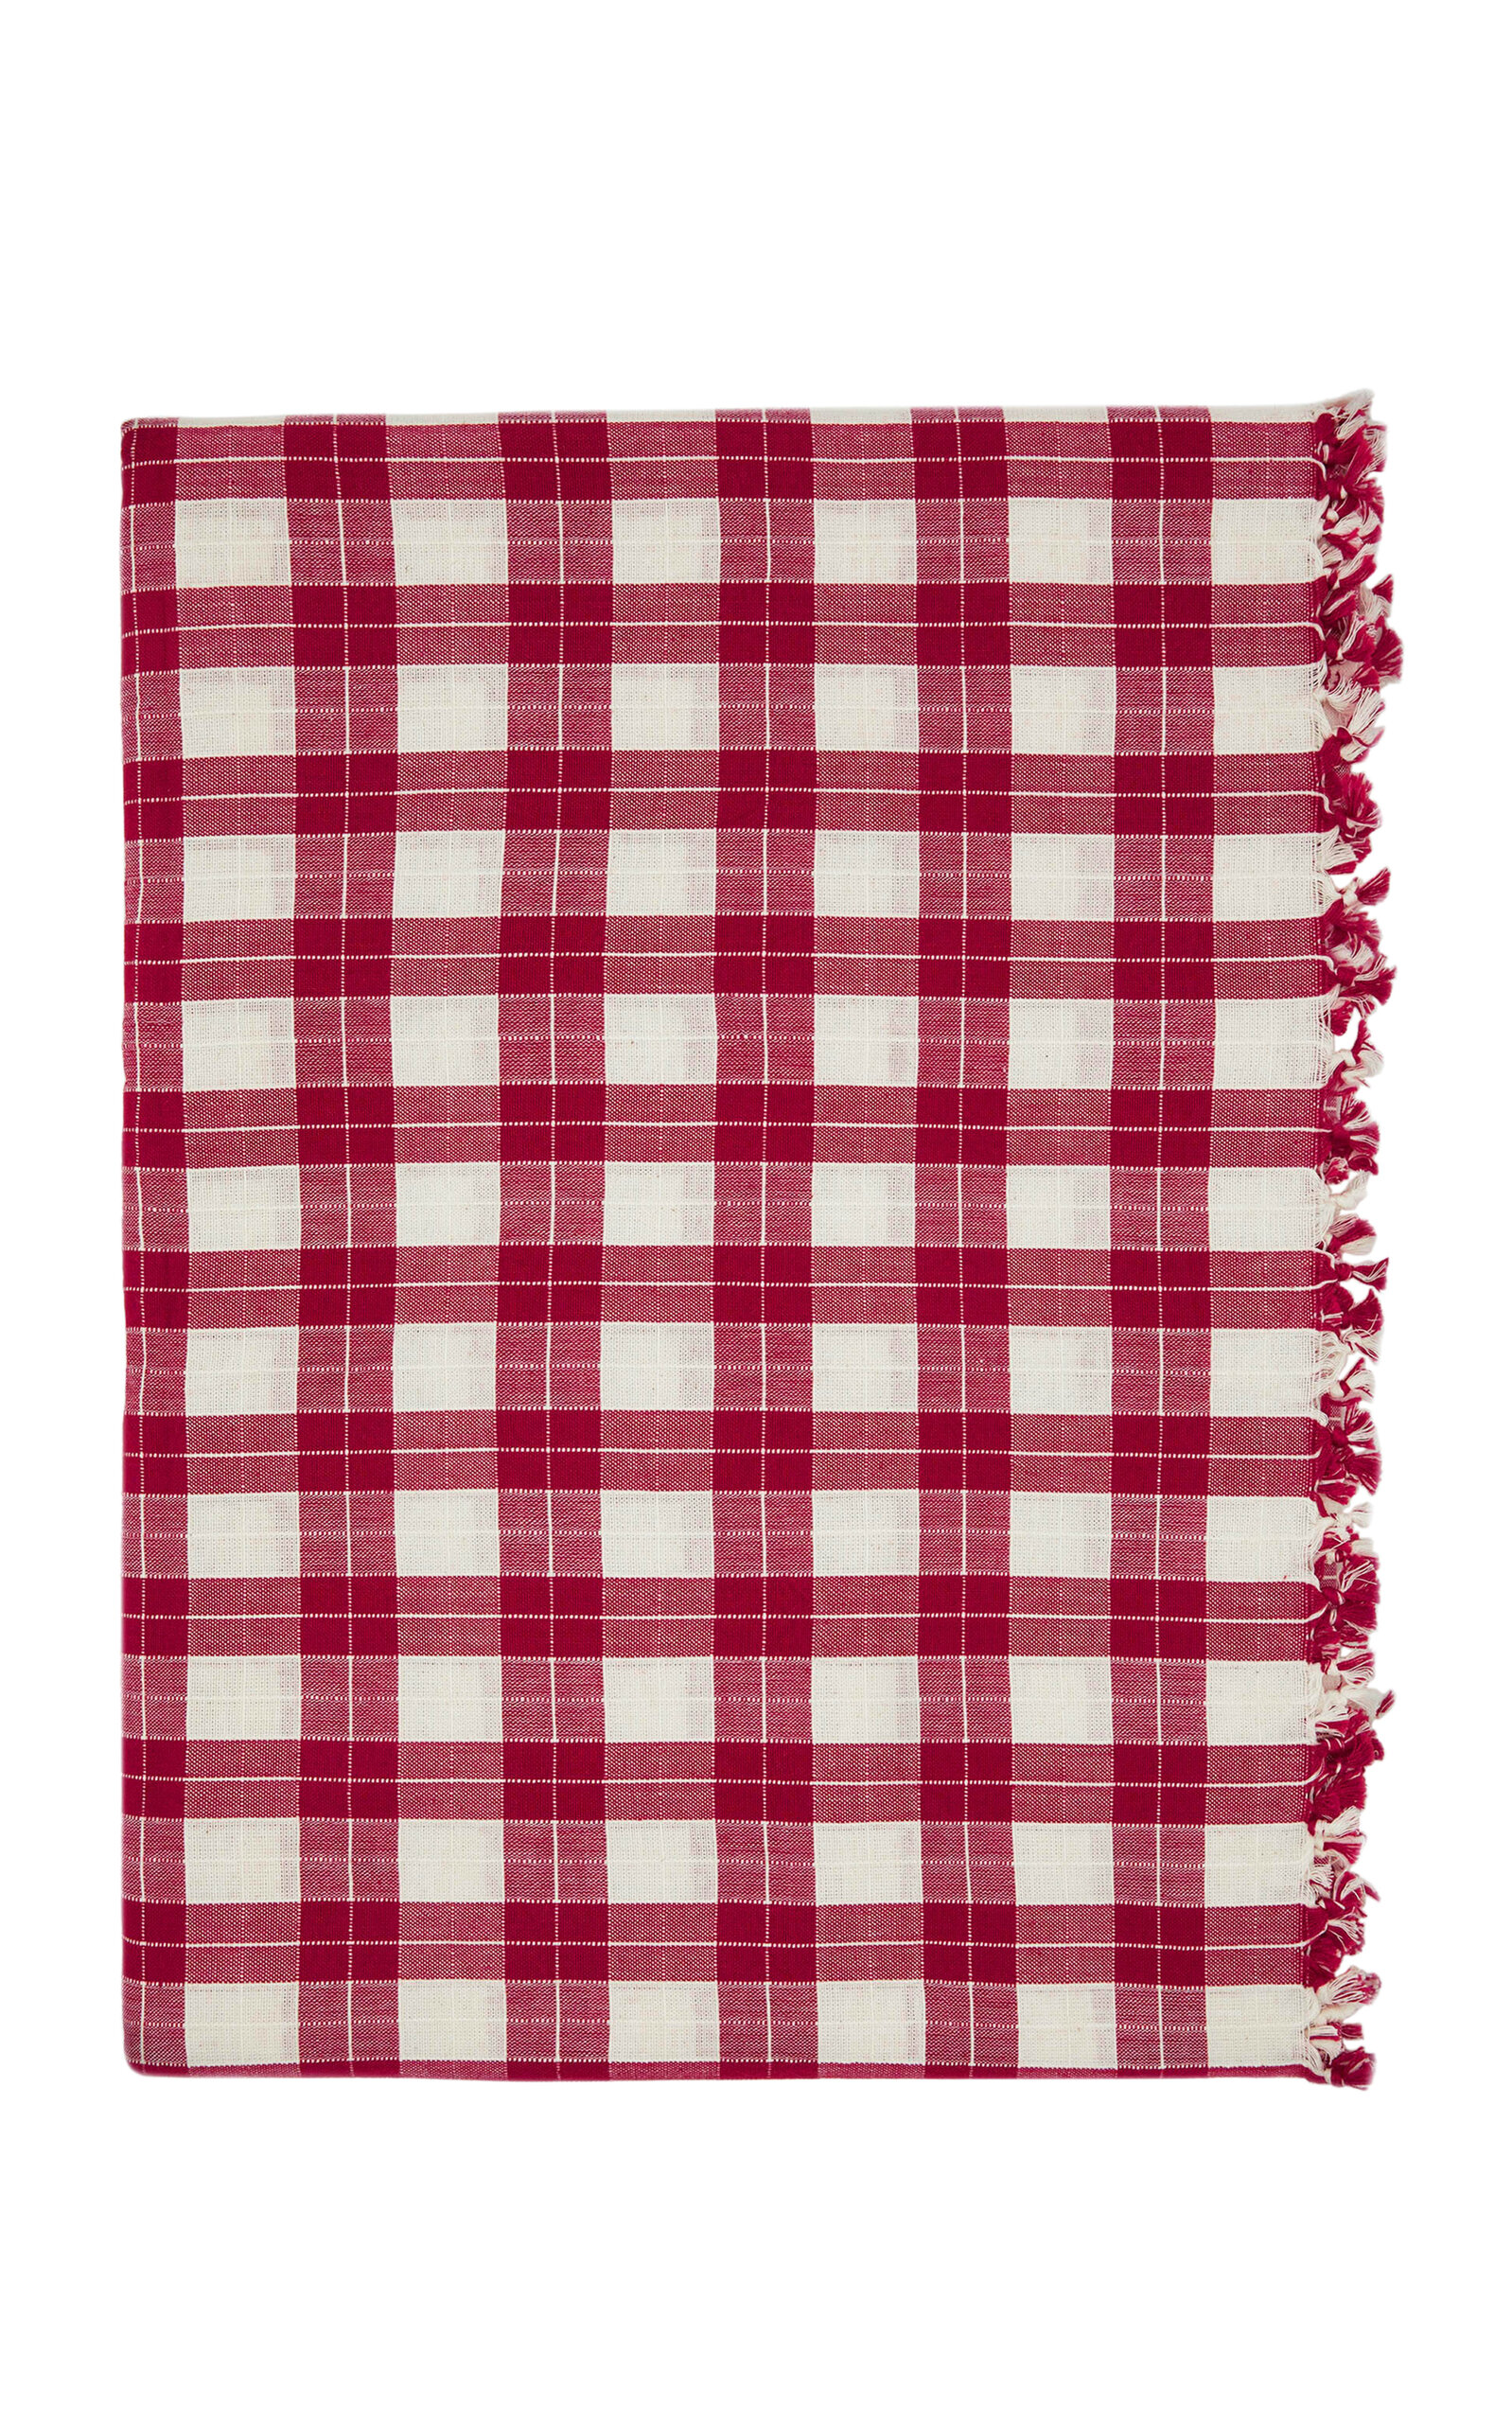 Heather Taylor Home Annabelle Plaid Red Tablecloth Large In Multi